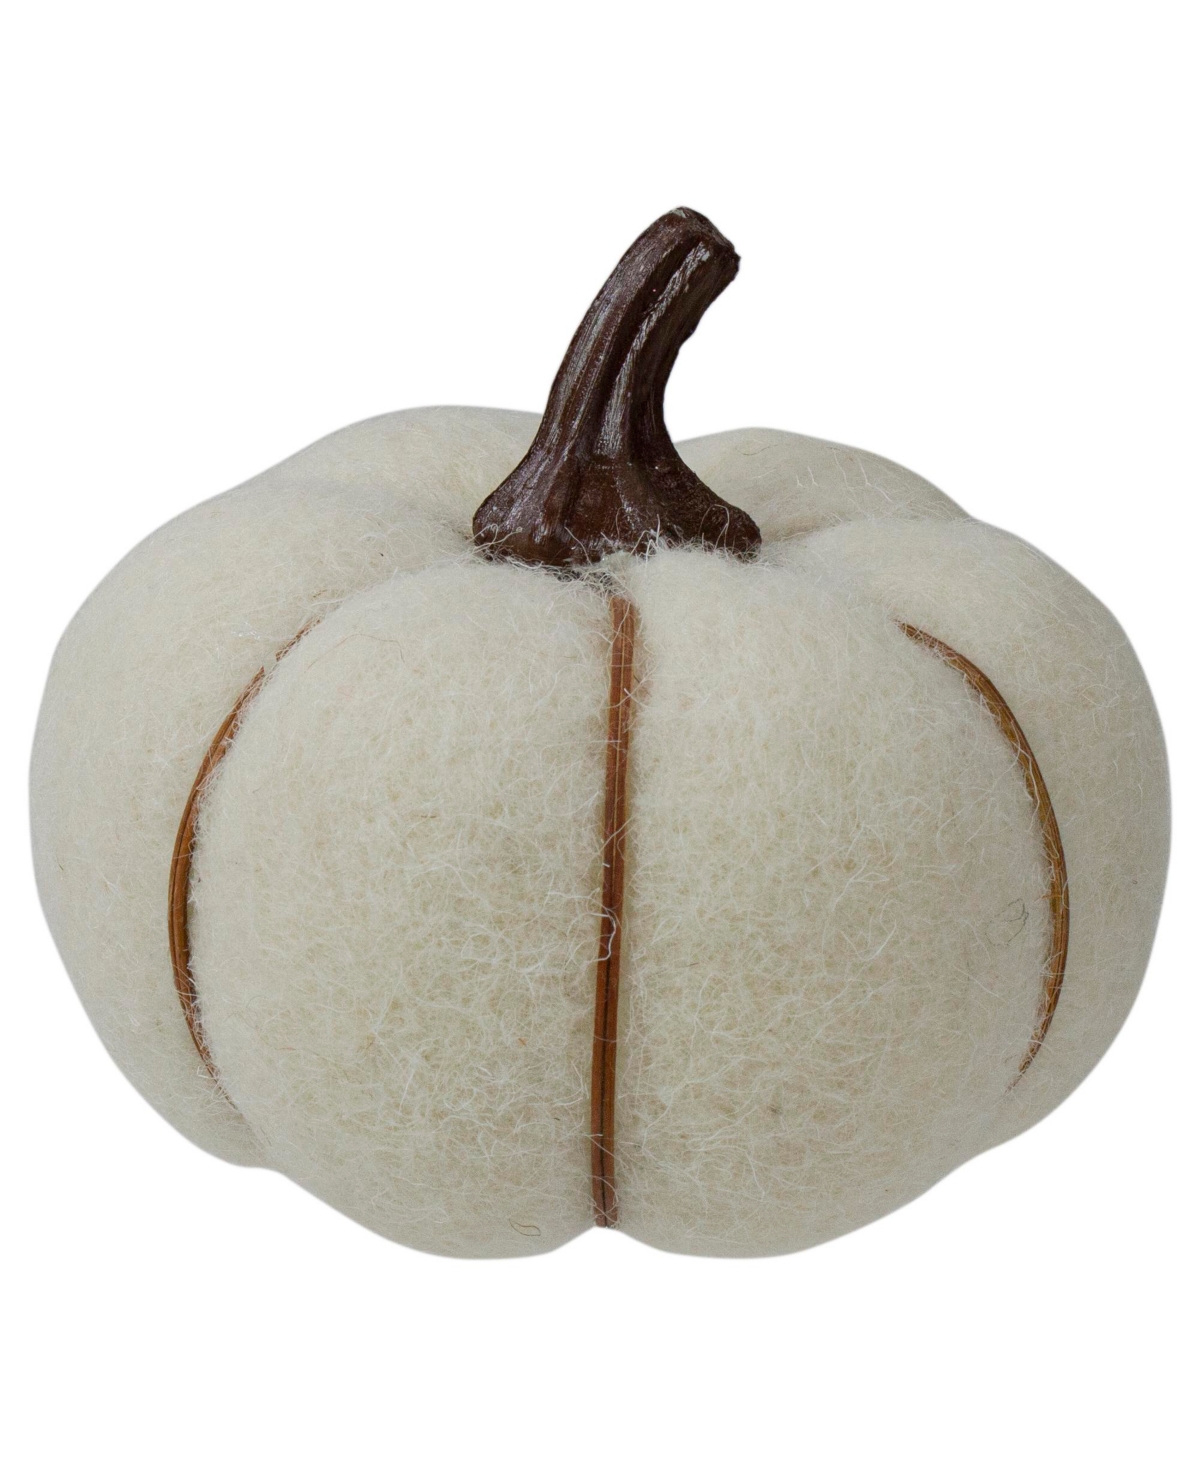 Cream and Brown Fall Harvest Tabletop Pumpkin, 5" - White